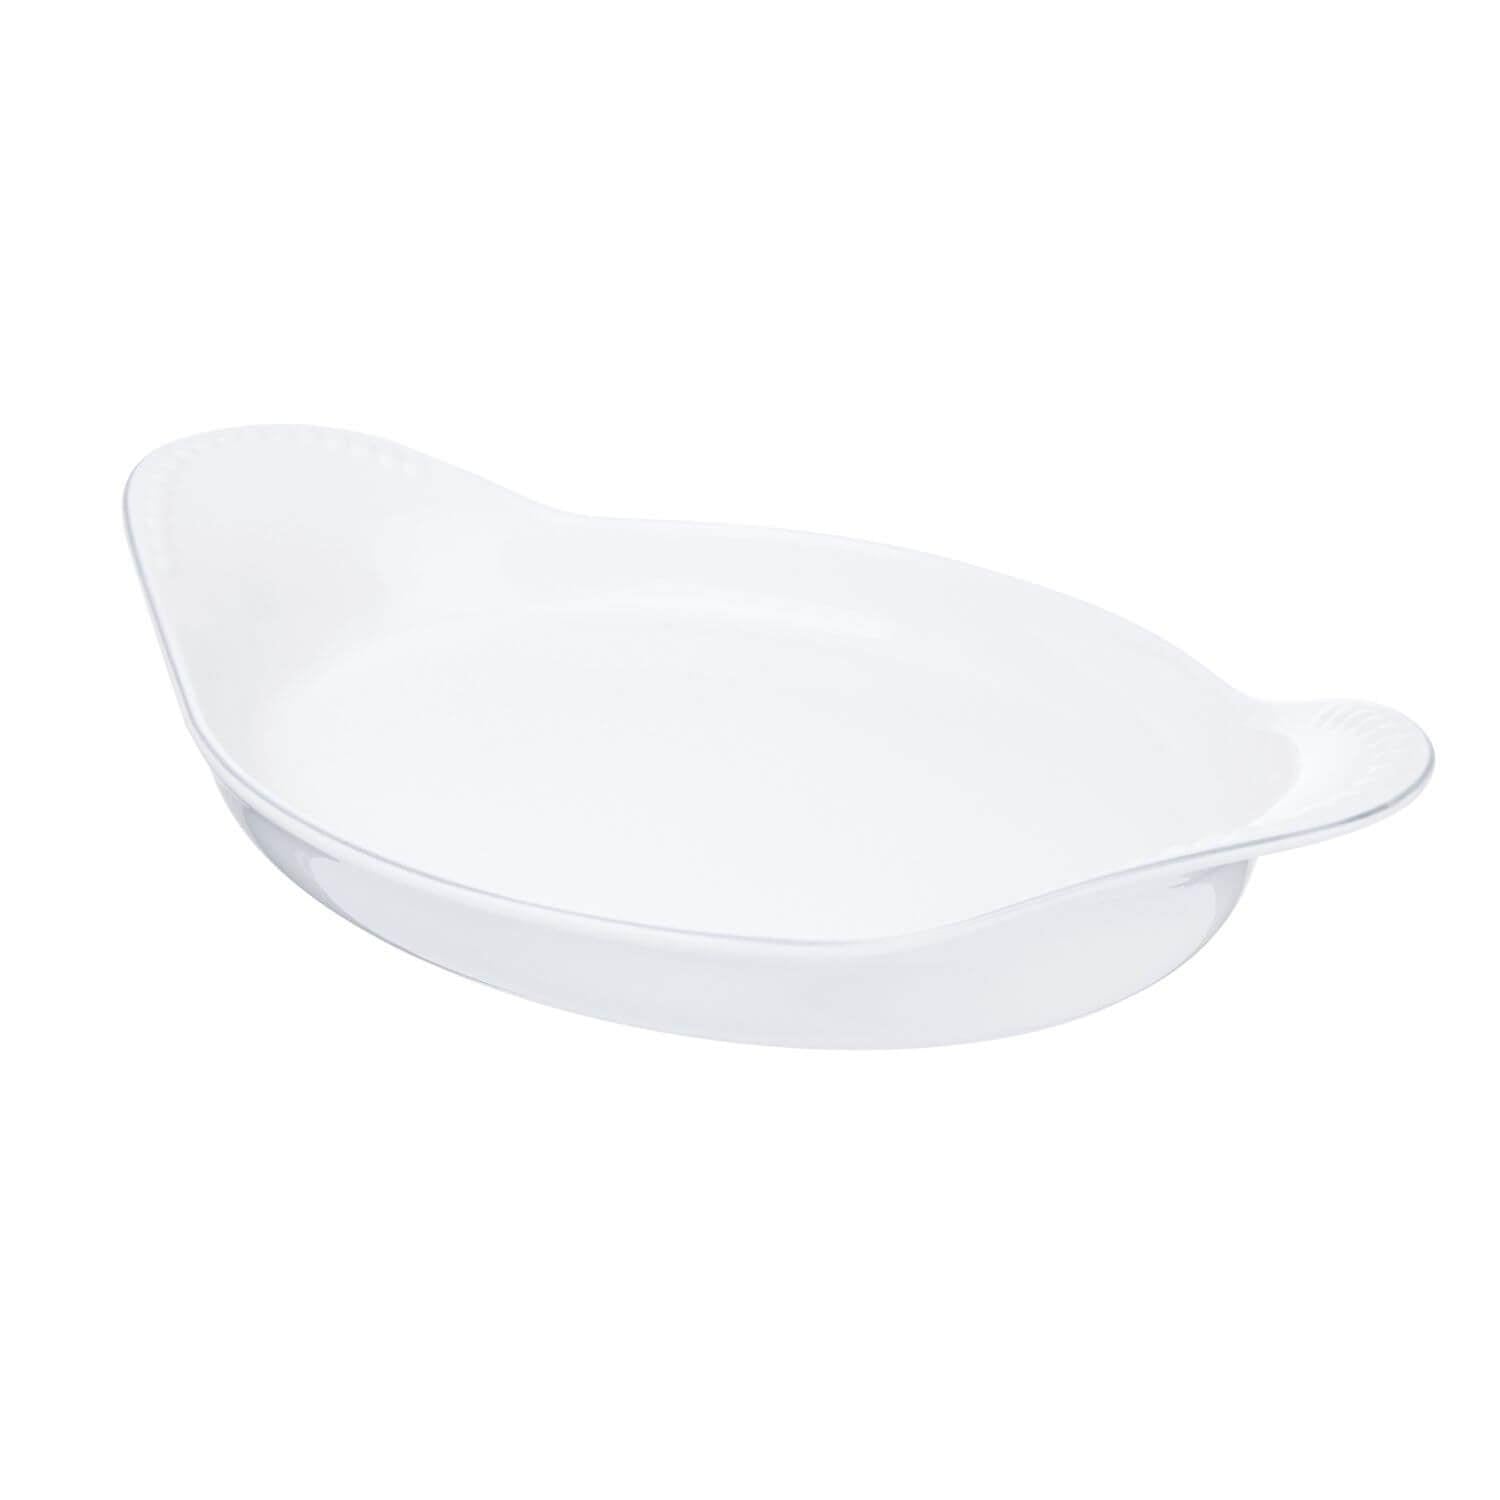 Mary Berry SIGNATURE OVAL SERVING DISH - 27CM 